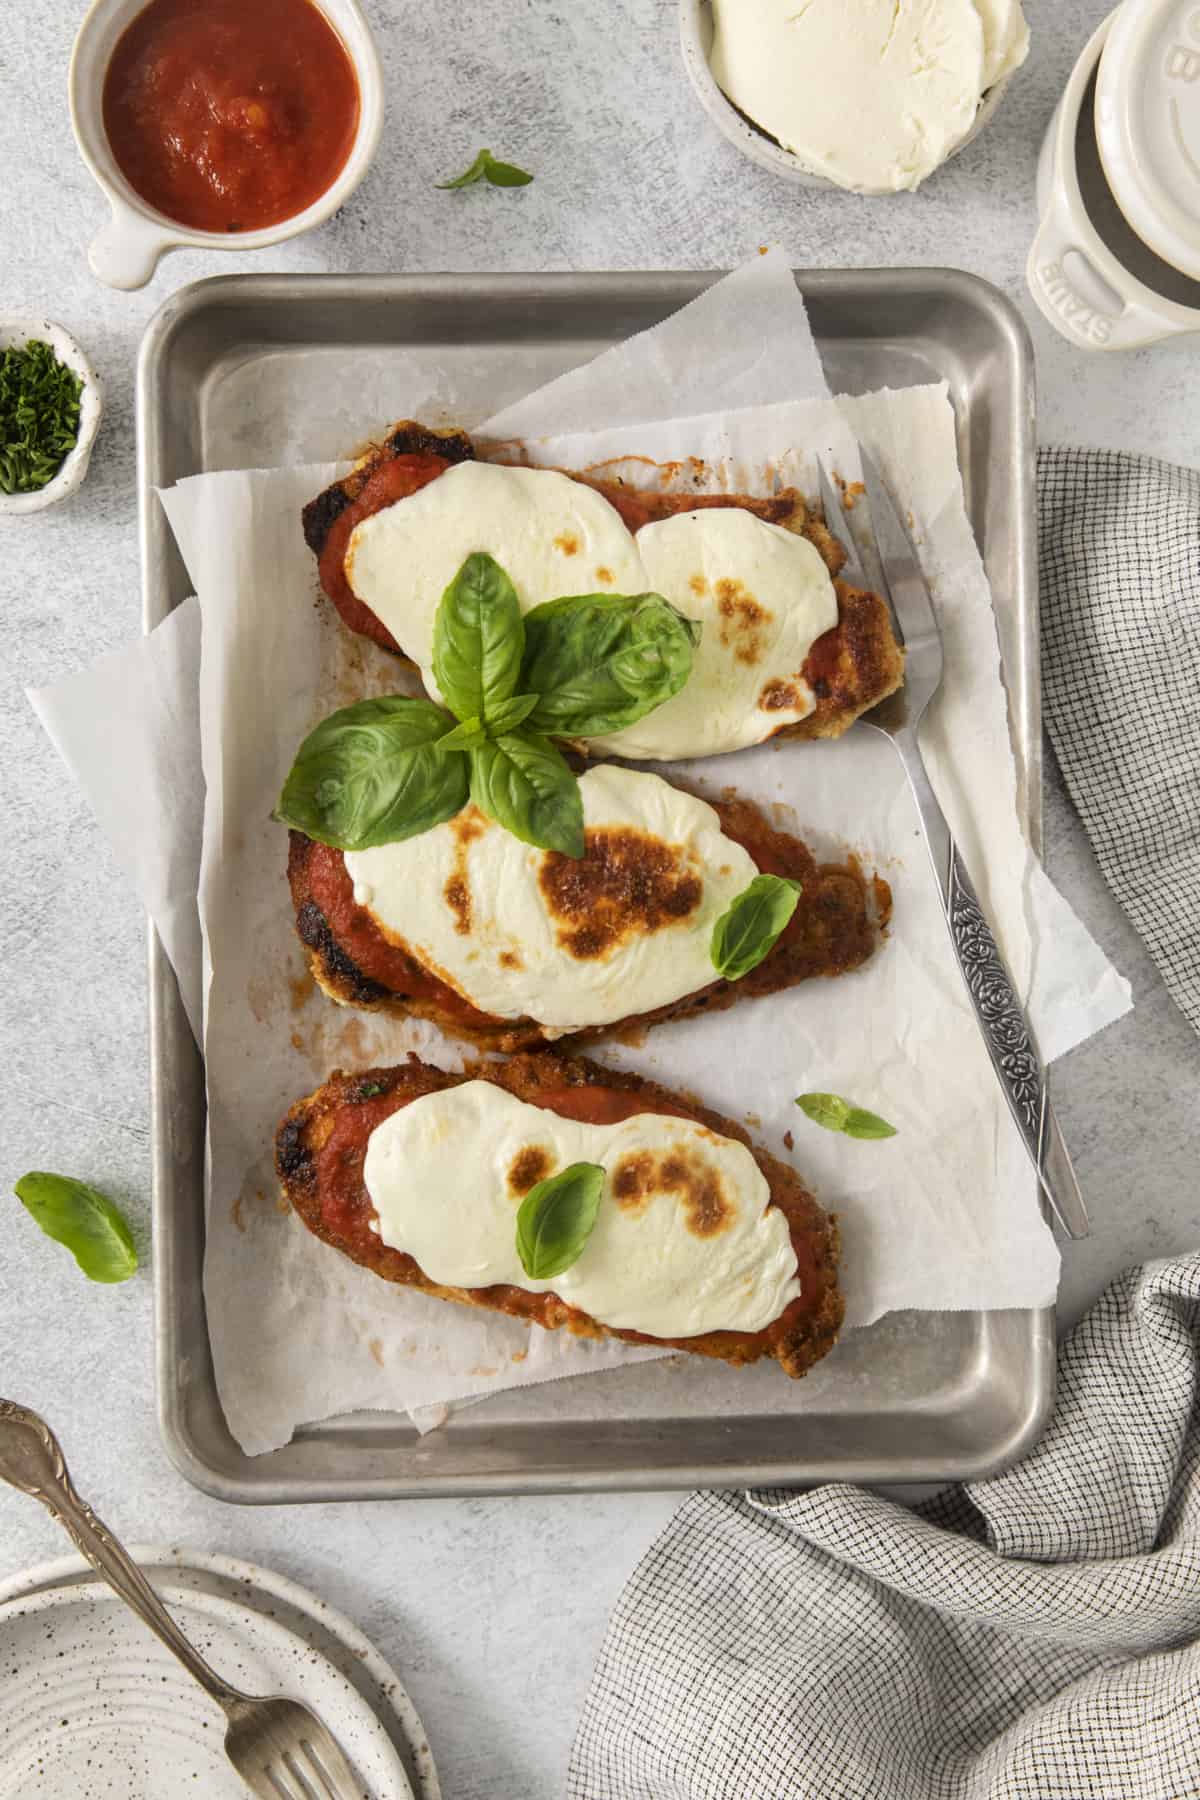 three pieces of chicken parmesan on a baking sheet from above garnished with fresh basil leaves.